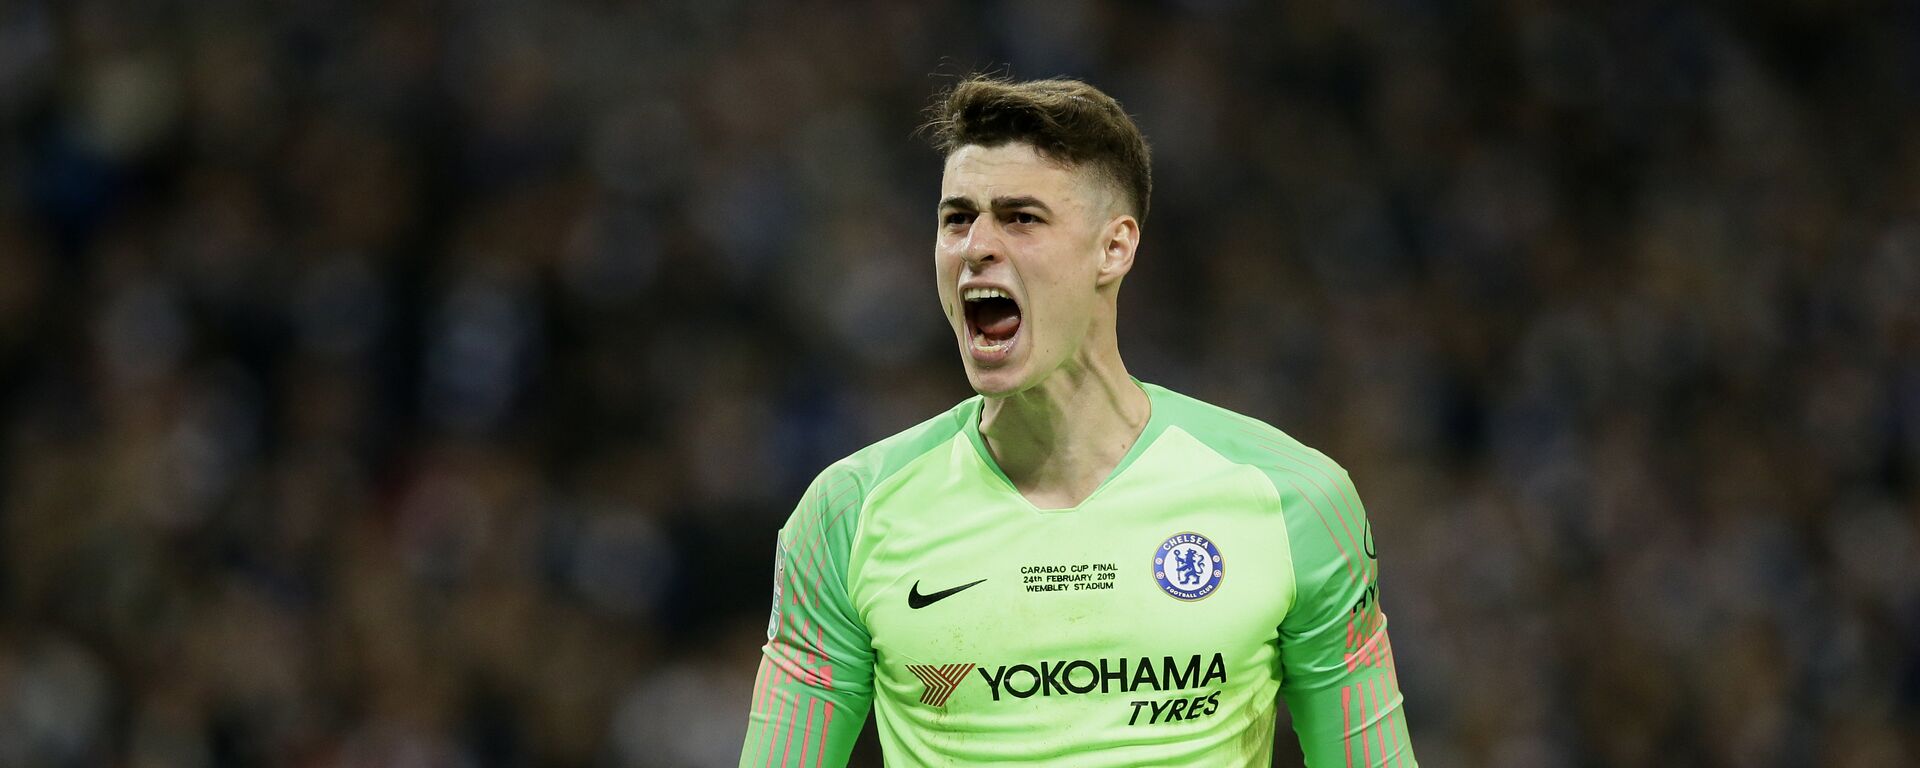 Chelsea's goalkeeper Kepa Arrizabalaga screams at the bench after refusing to be substituted at Wembley on 24 February 2019 - اسپوتنیک افغانستان  , 1920, 21.09.2020